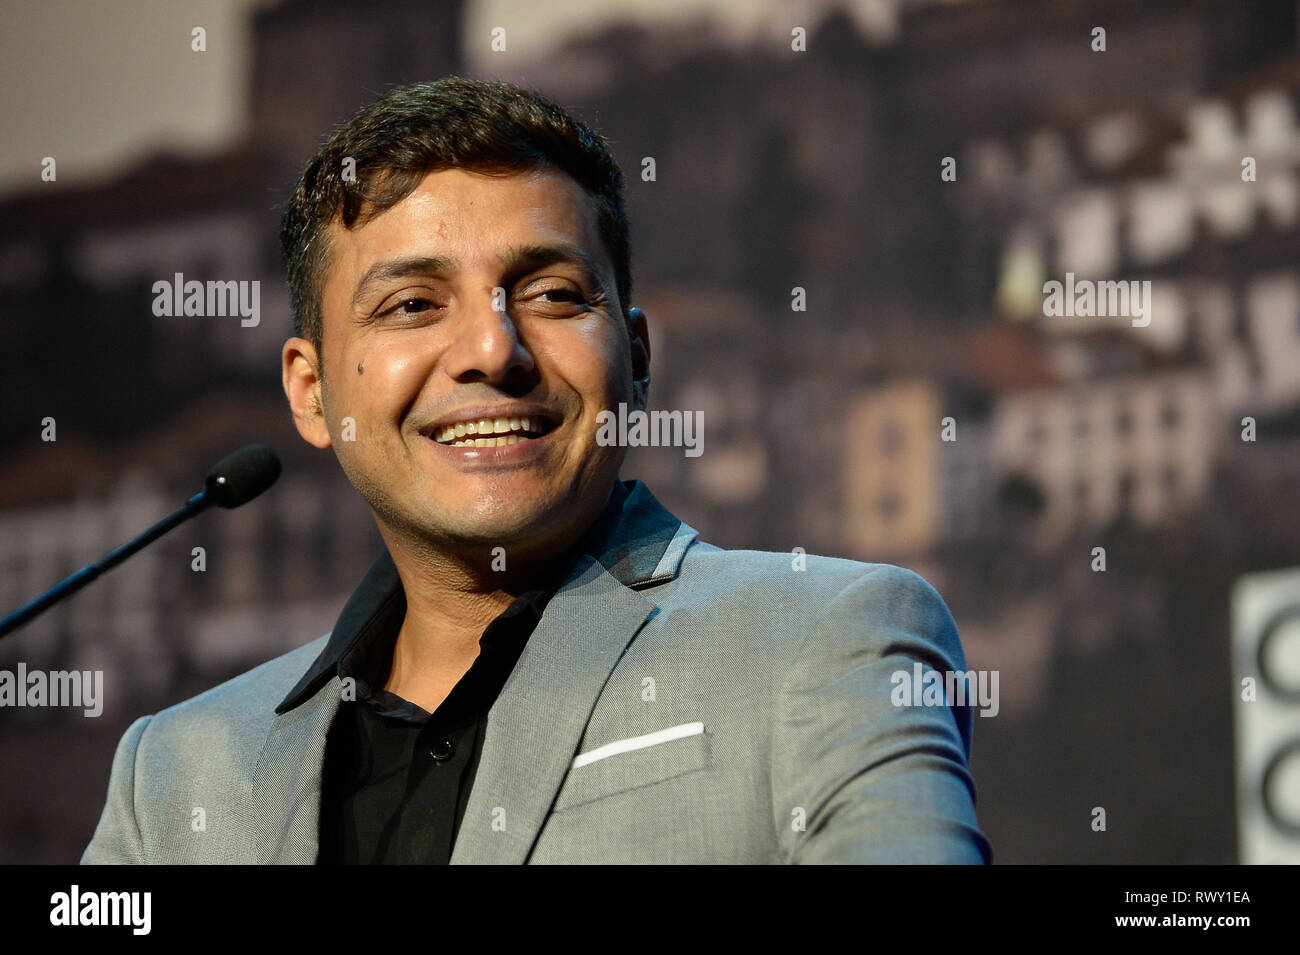 Porto, Portugal. 7th Mar, 2019. Afroz Shah, Indian Activist seen speaking during the Climate Change Porto Summit at Alfandega Congress Center. Credit: Omar Marques/SOPA Images/ZUMA Wire/Alamy Live News Stock Photo